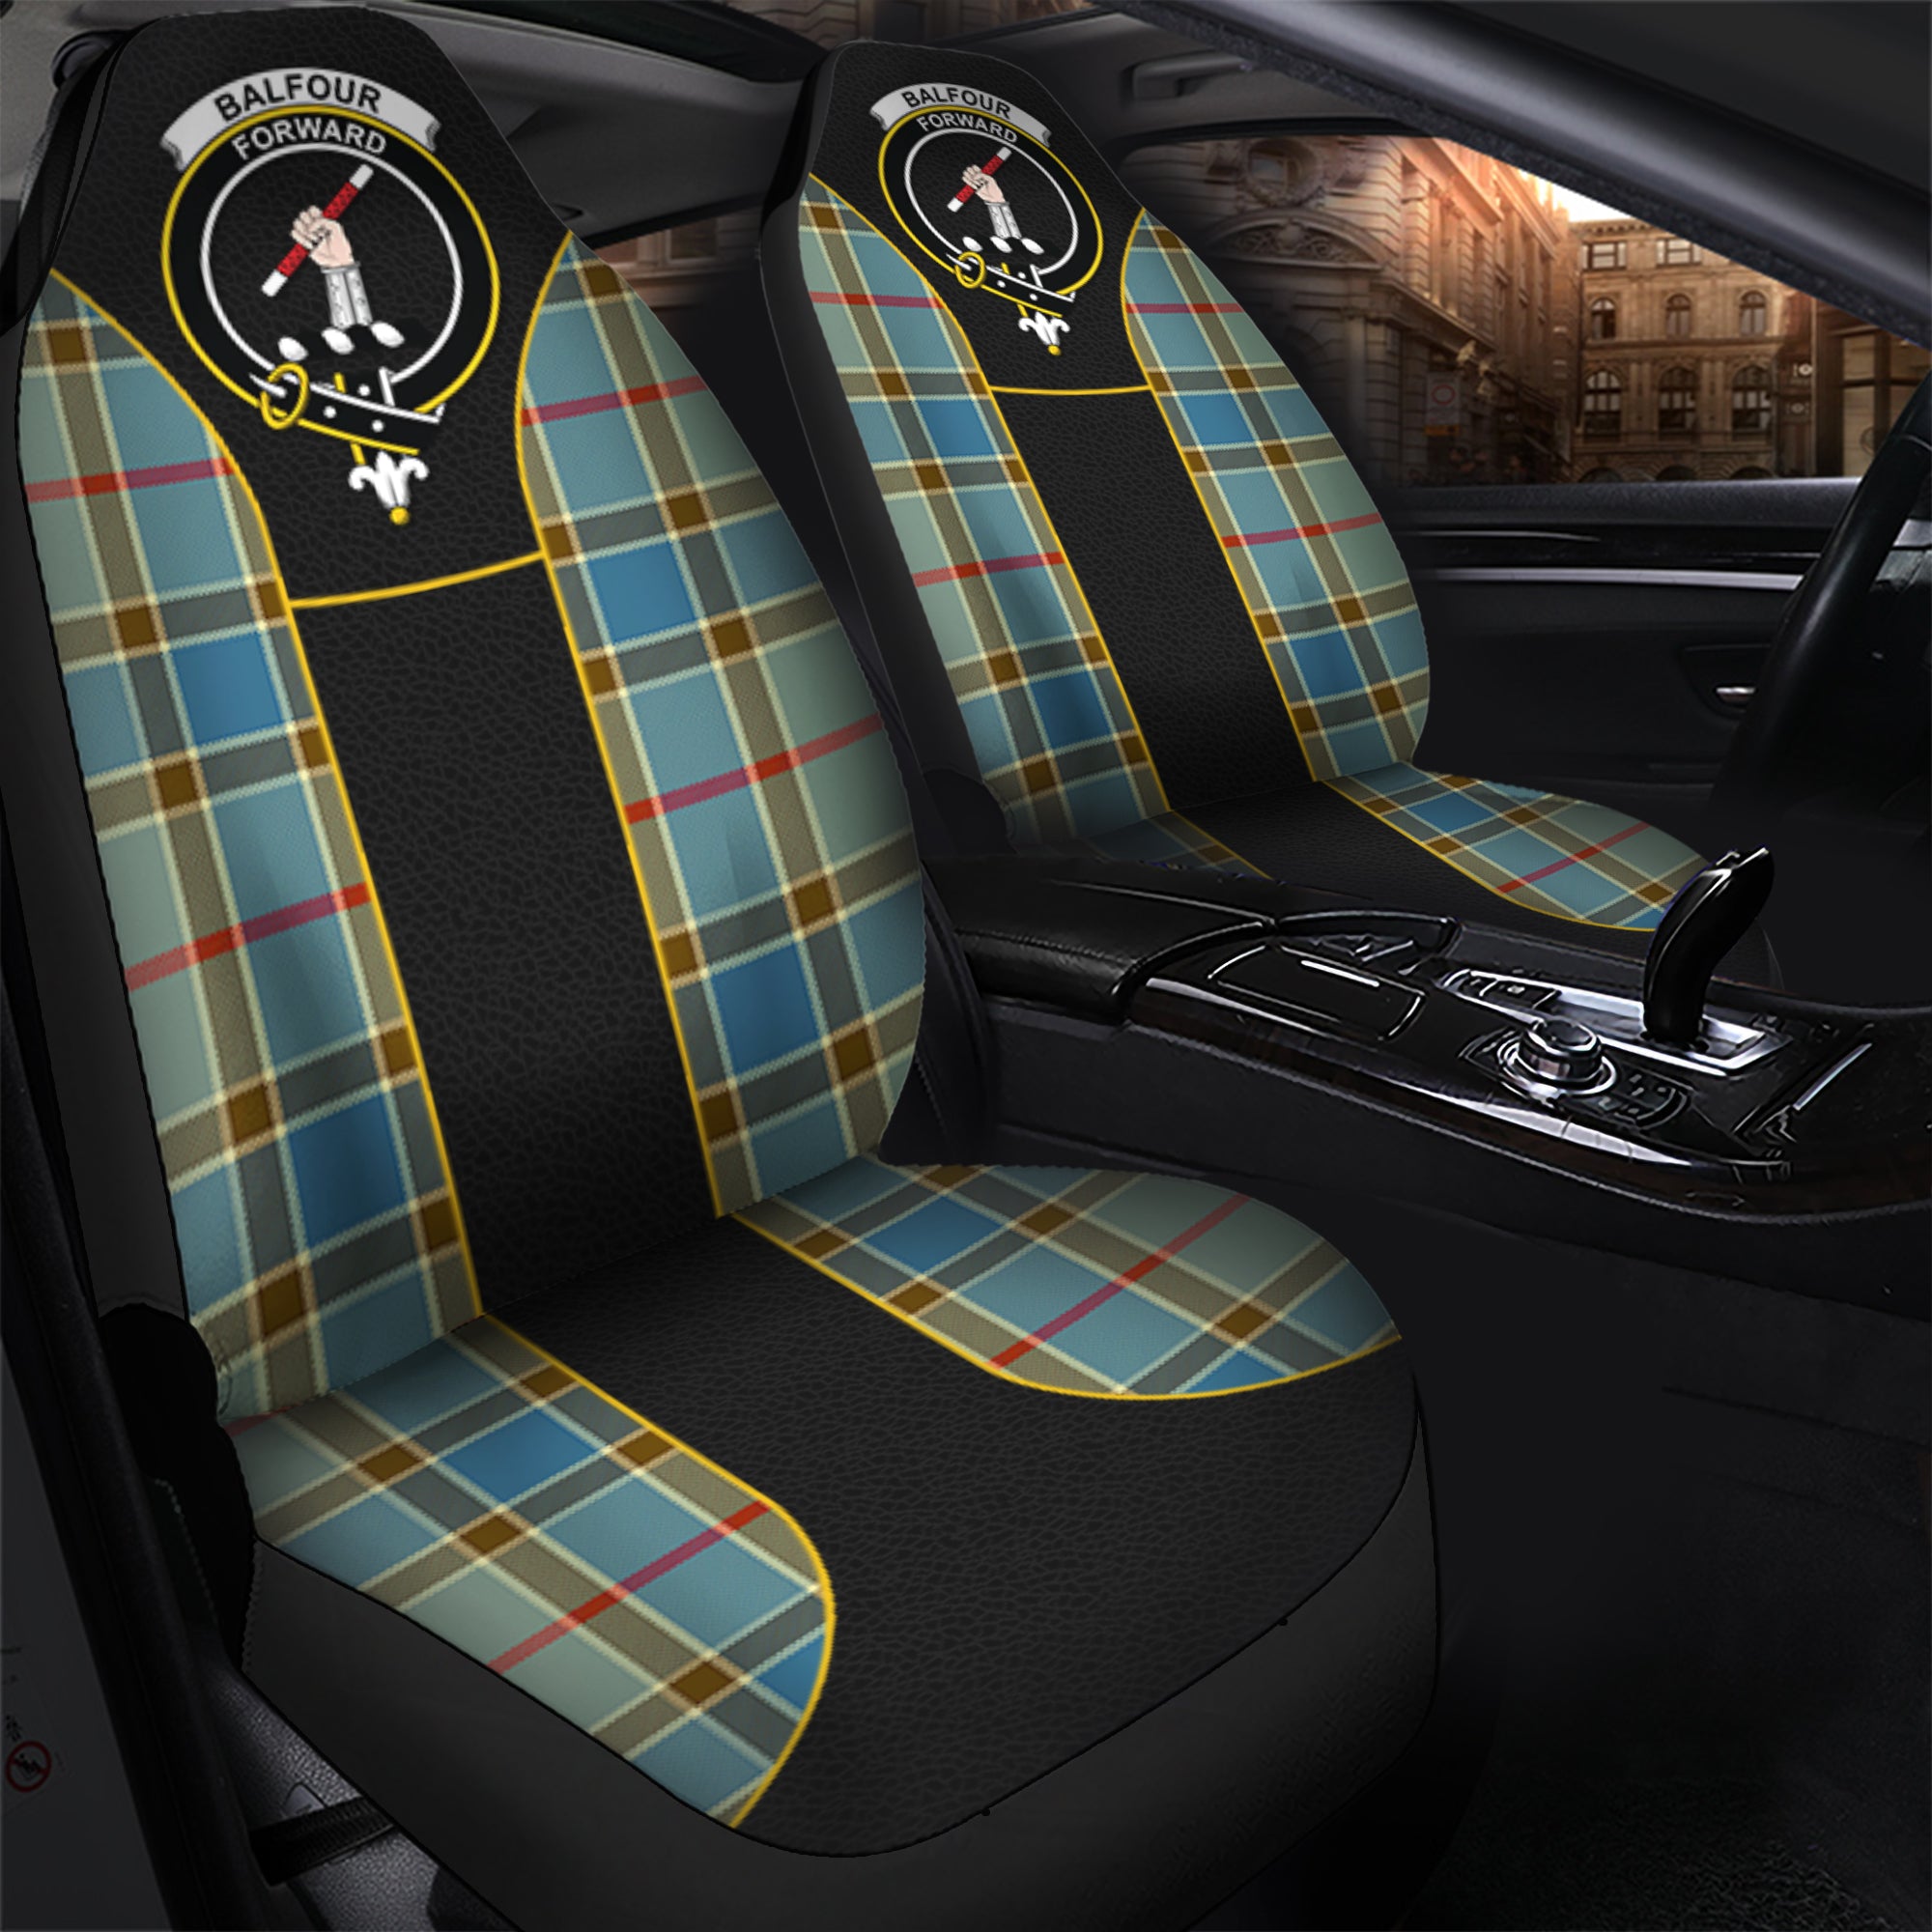 scottish-balfour-blue-tartan-crest-car-seat-cover-special-style